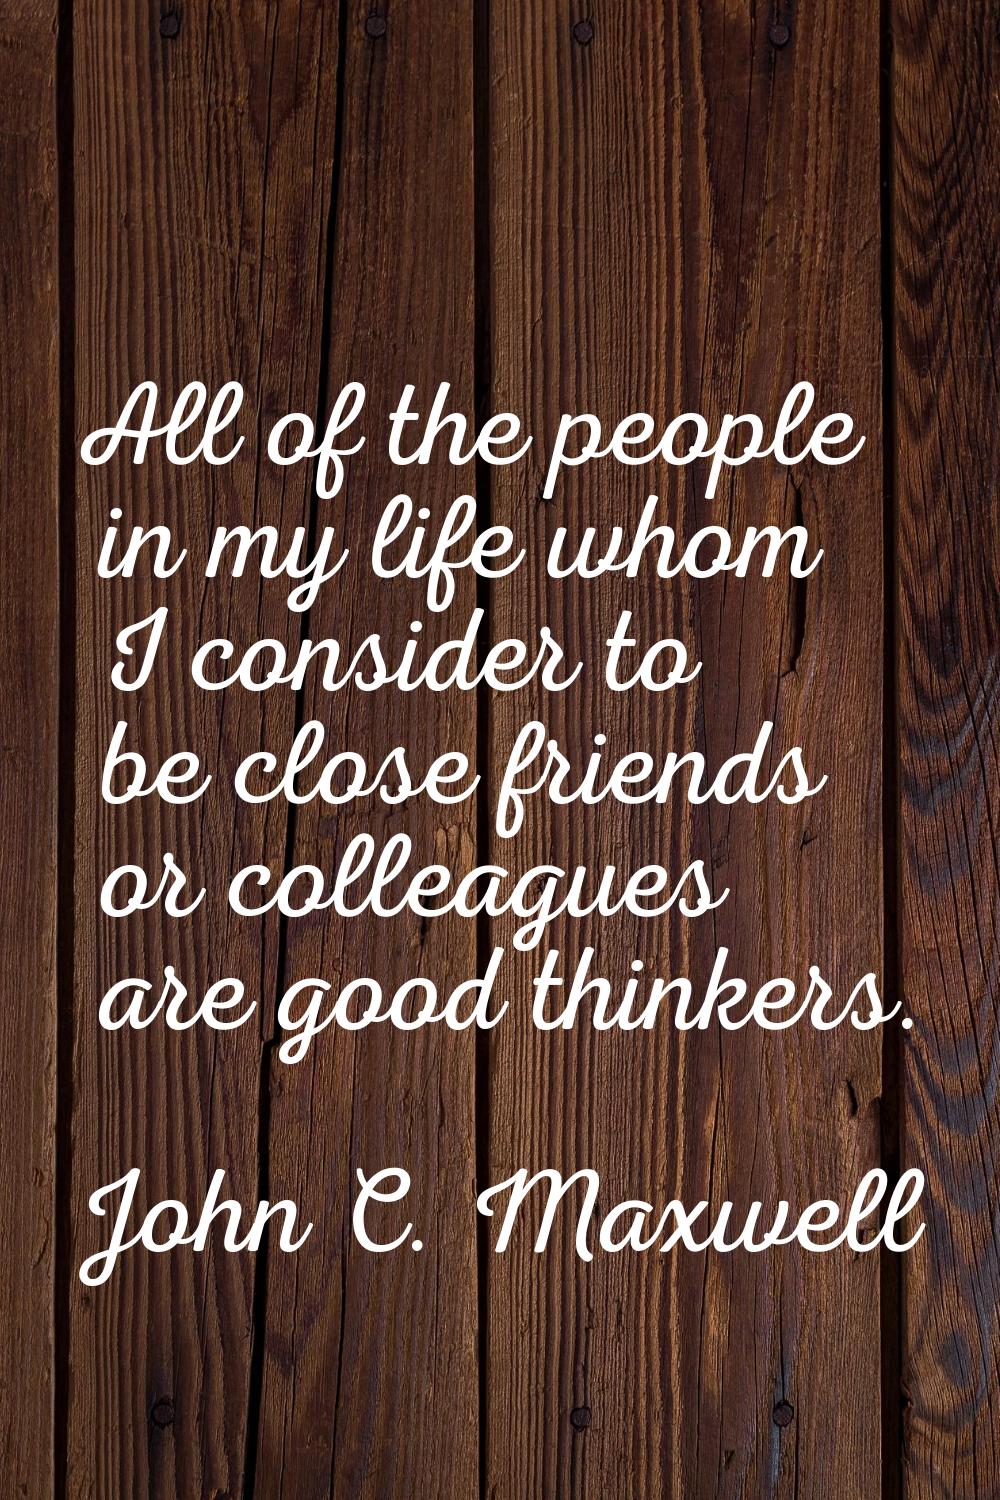 All of the people in my life whom I consider to be close friends or colleagues are good thinkers.